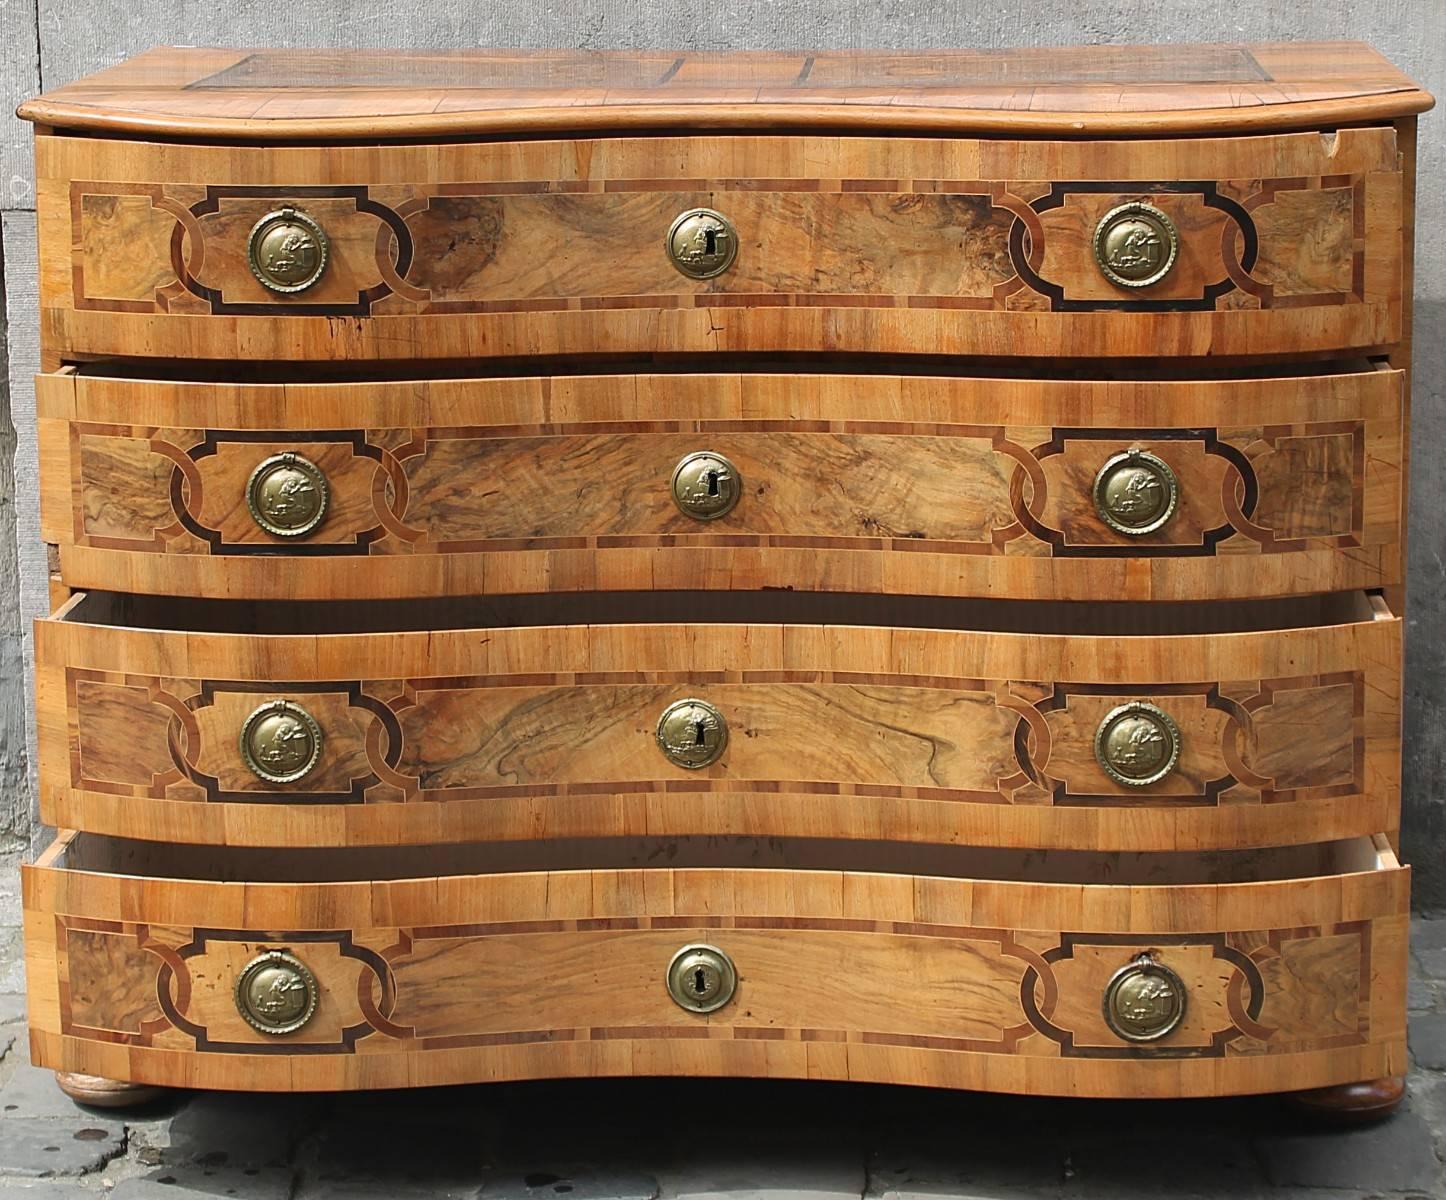 German 18th century walnut, chest of drawers.
The front is curved. Four drawers with marquetry pattern. Fixed handles and locks are in bronze gilt.
The tray is also in marquetry. The feet are in bowls.
Perfect example mixture of Louis XV style